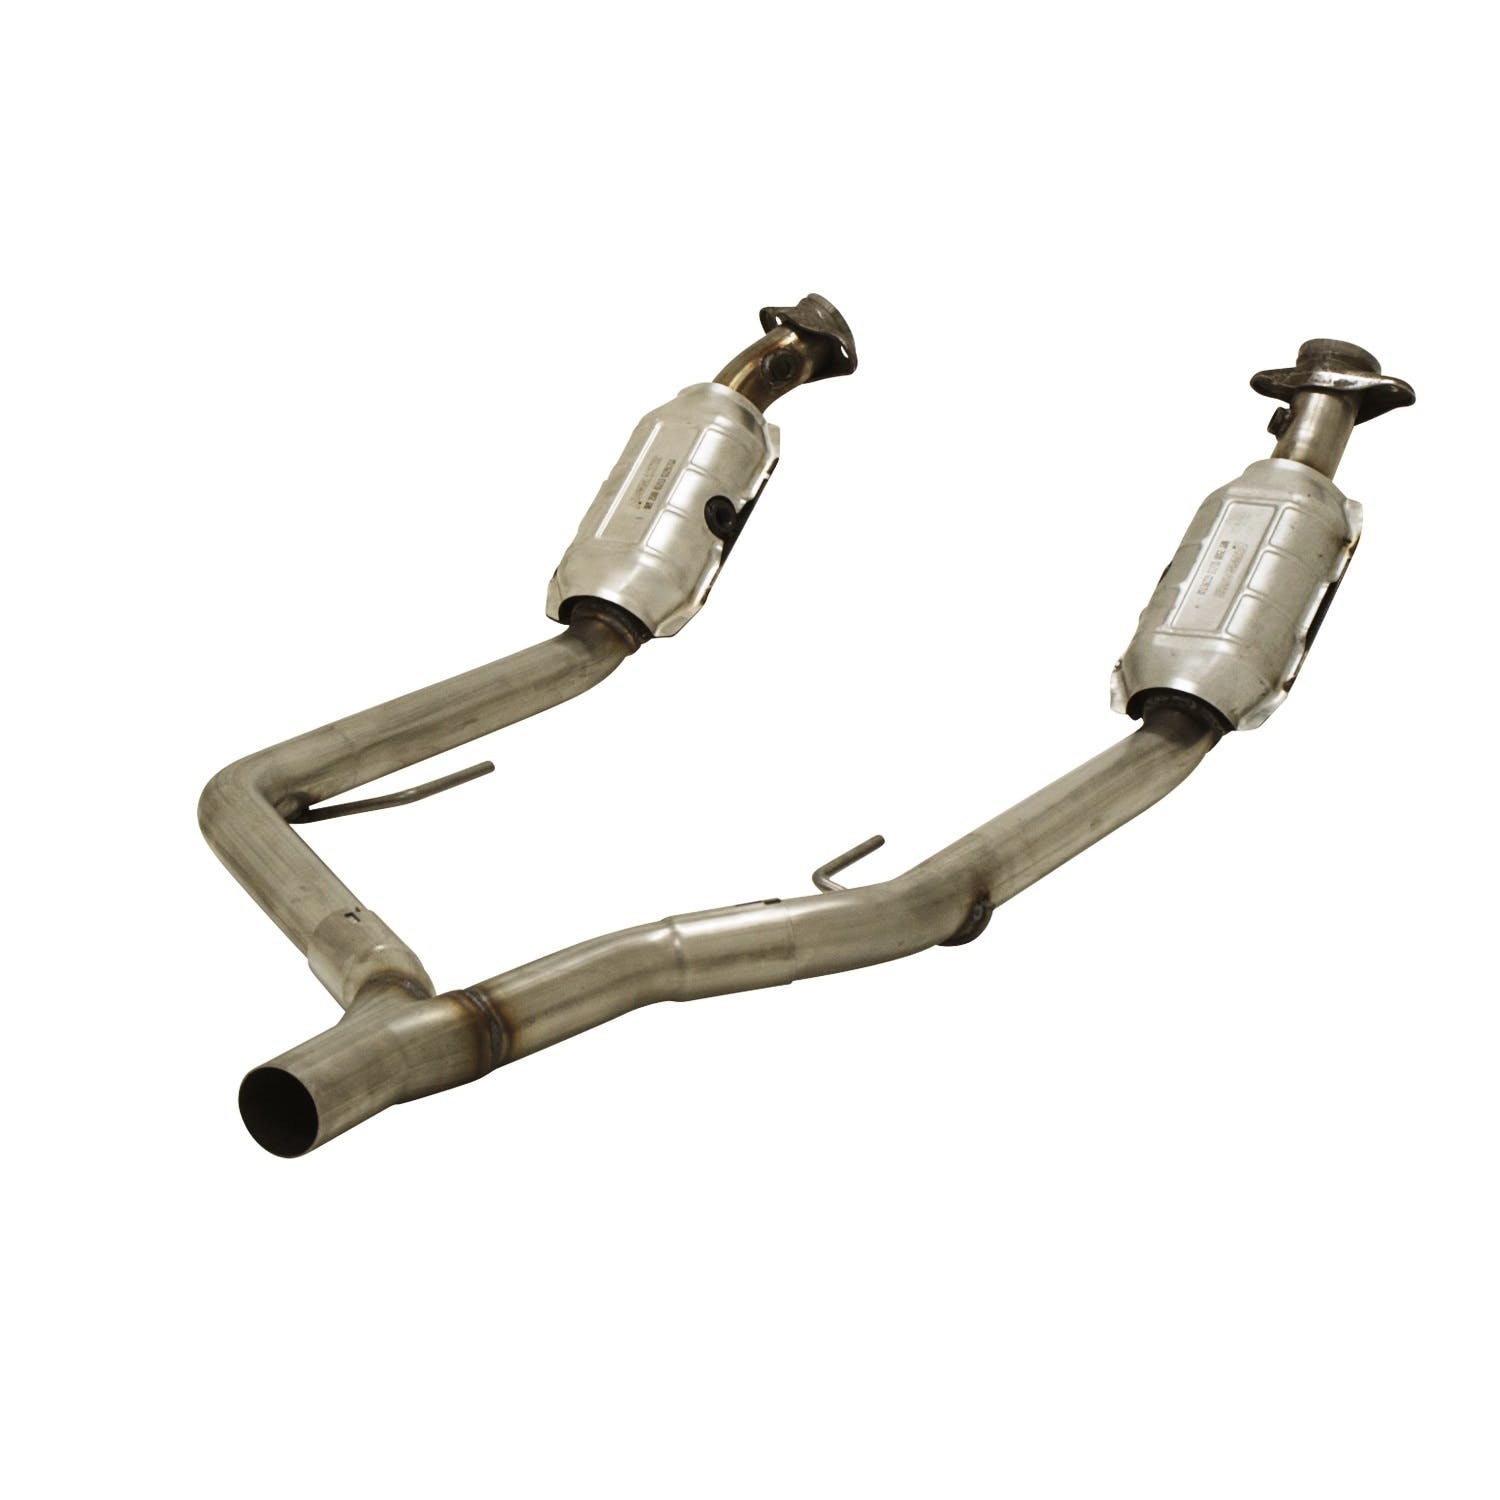 Flowmaster Catalytic Converters 2020040 Catalytic Converter-Direct Fit-2.25 in. Inlet/Outlet-49 State